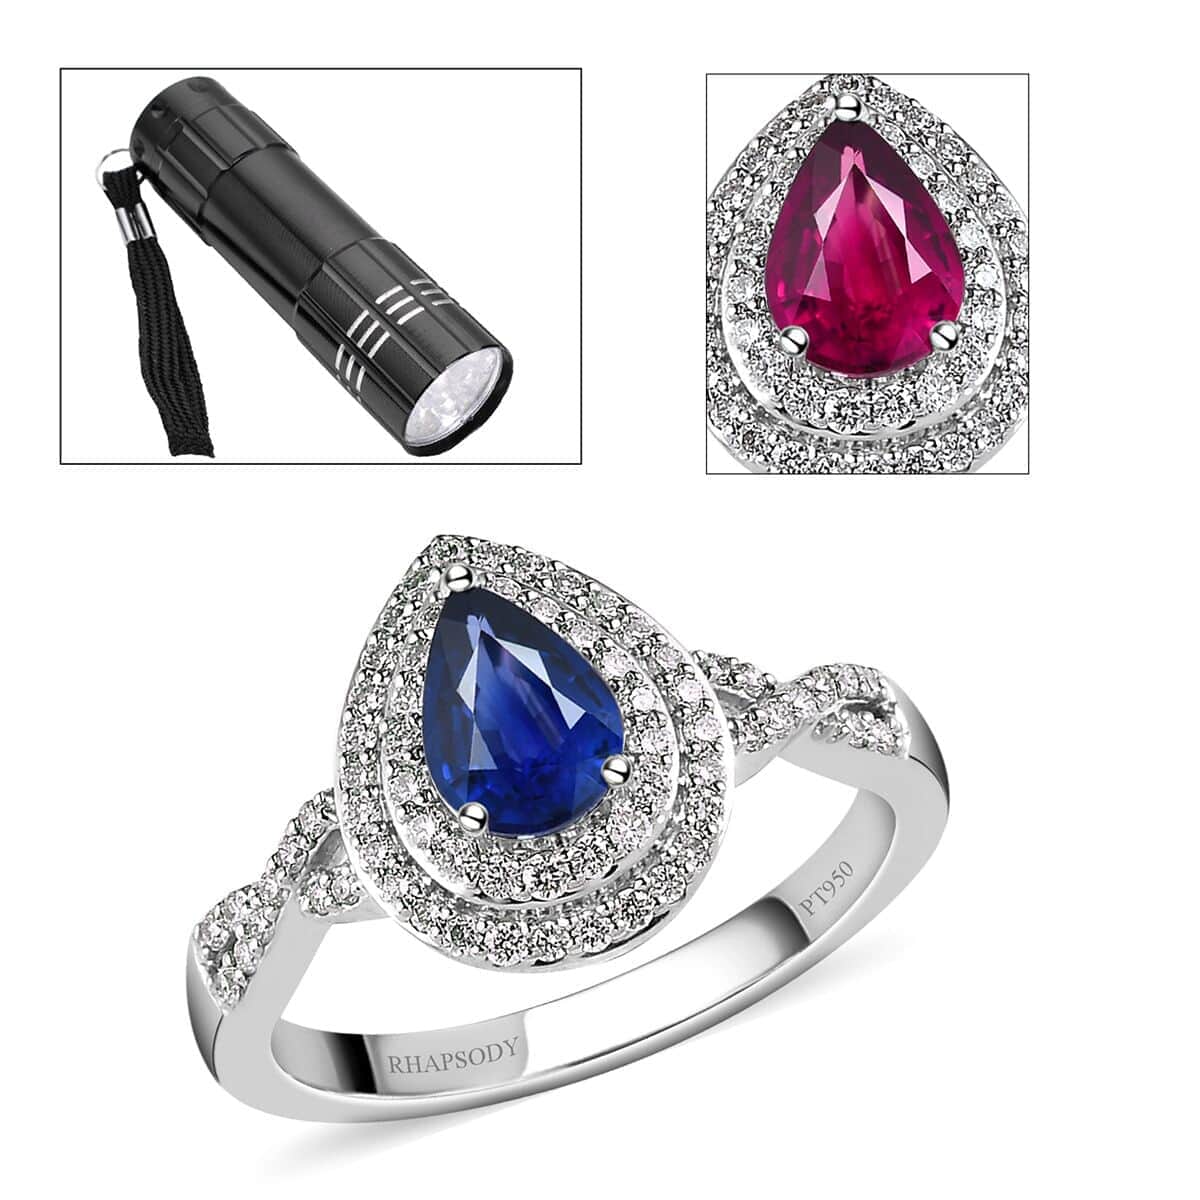 Ankur Treasure Chest Rhapsody 950 Platinum AAAA Tanzanian Color Change Sapphire and E-F VS2 Diamond Cocktail Ring (Size 7.0) 5.50 Grams 1.10 ctw with Free UV Flash Light image number 0